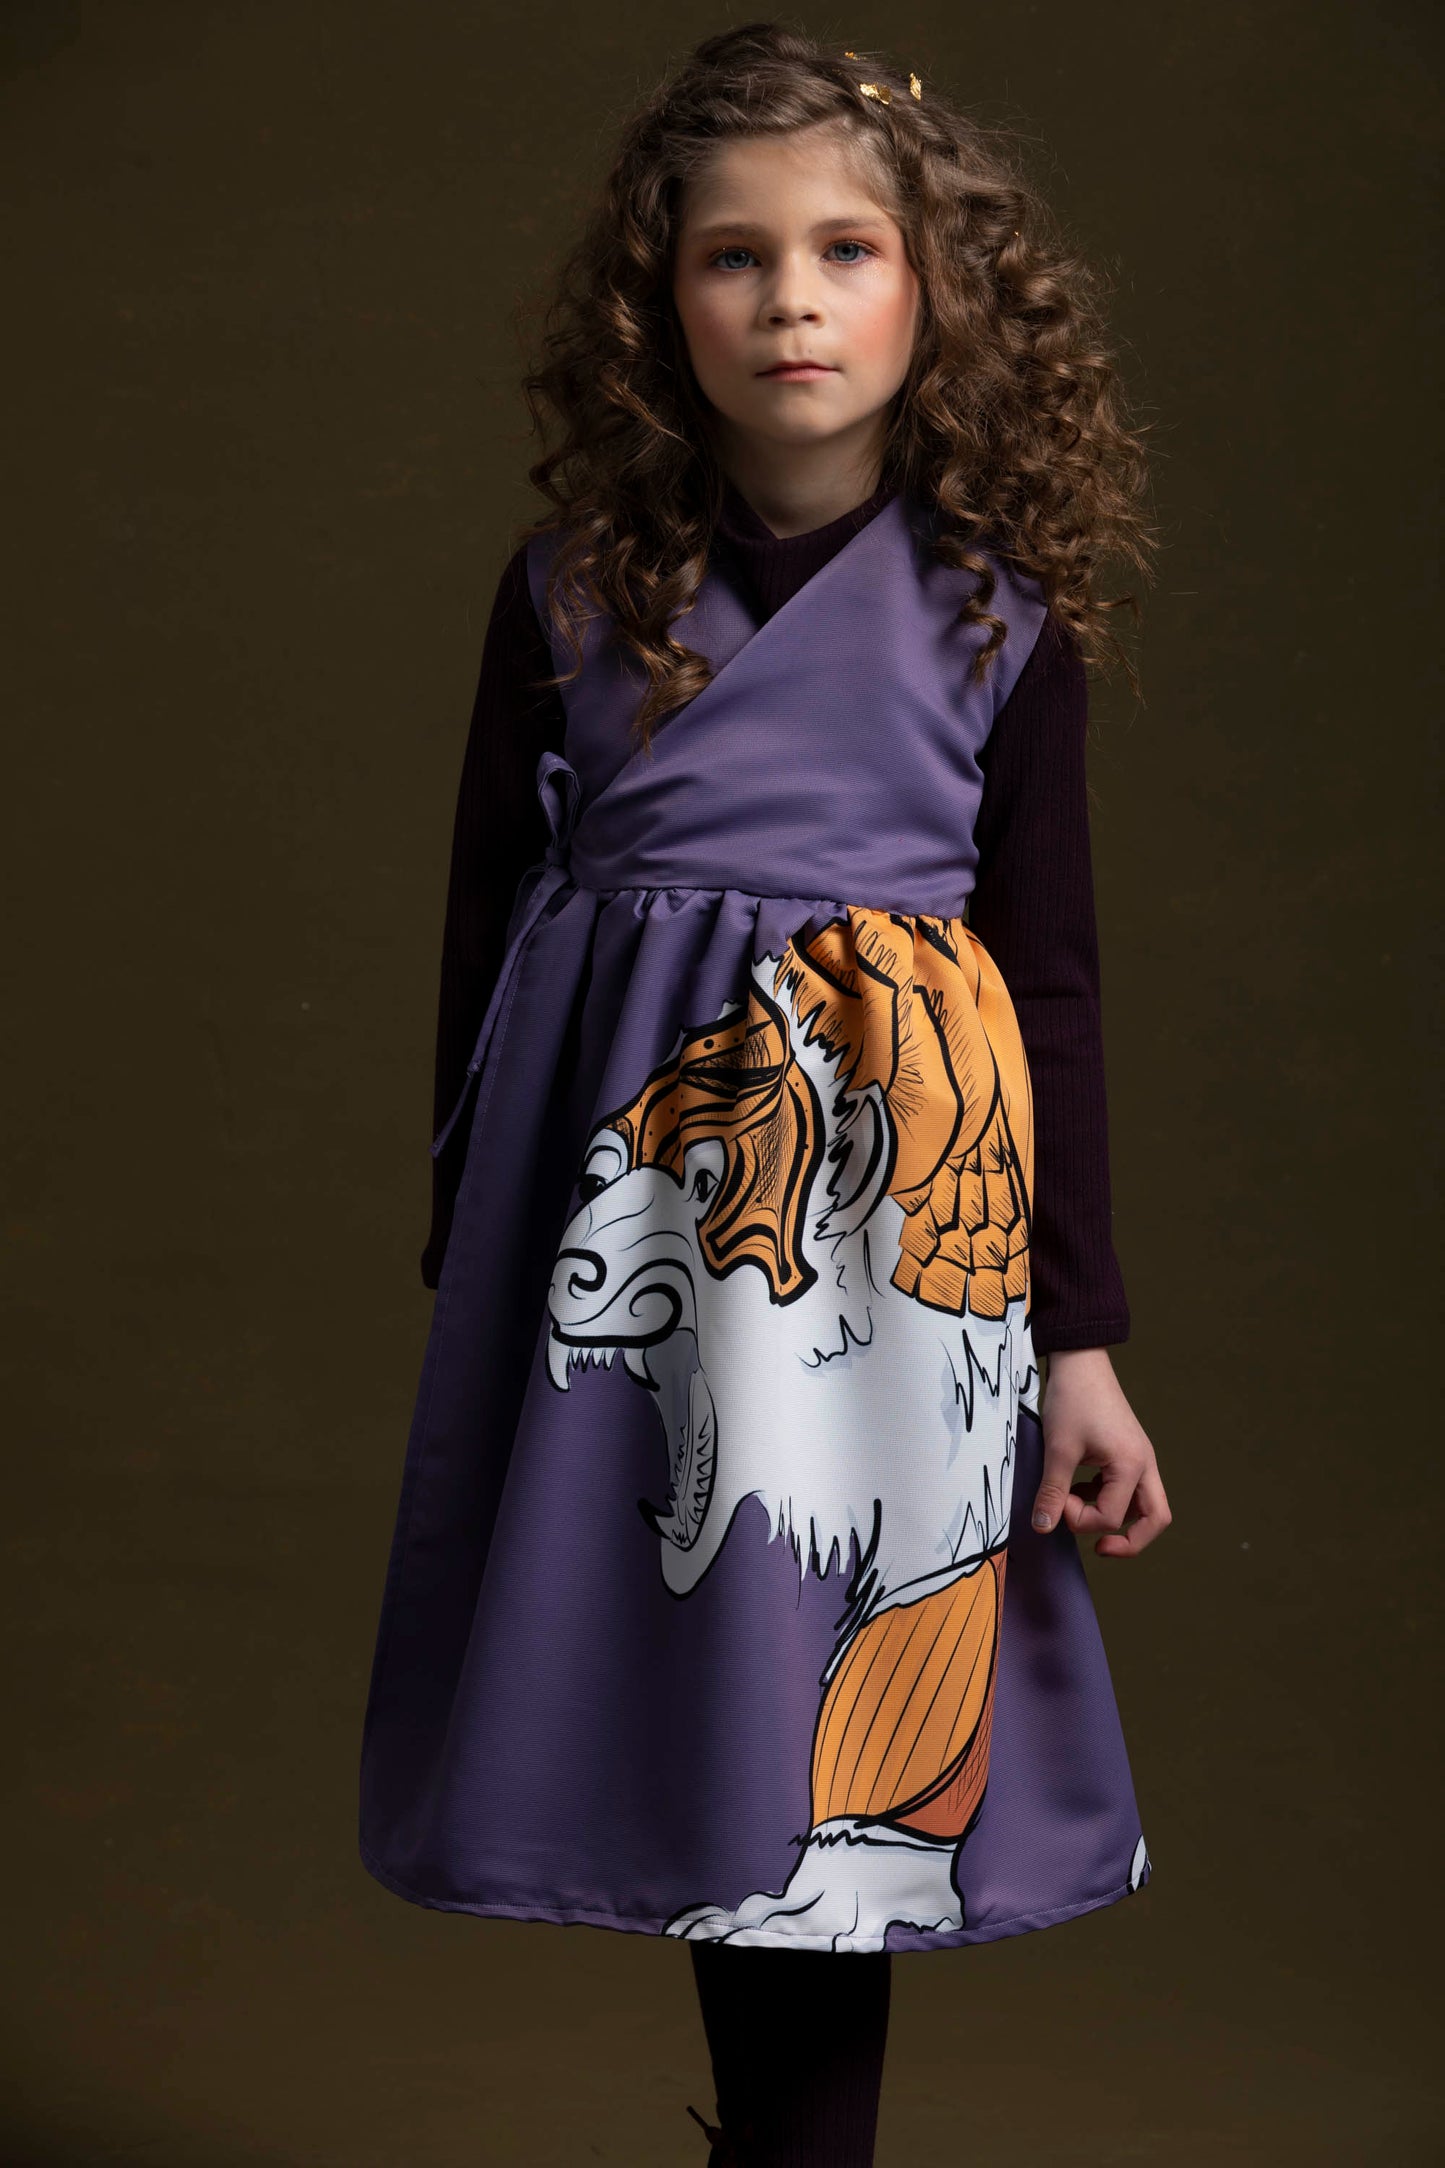 This young sweetheart shows off her purple knit tunic with the lorek dress 